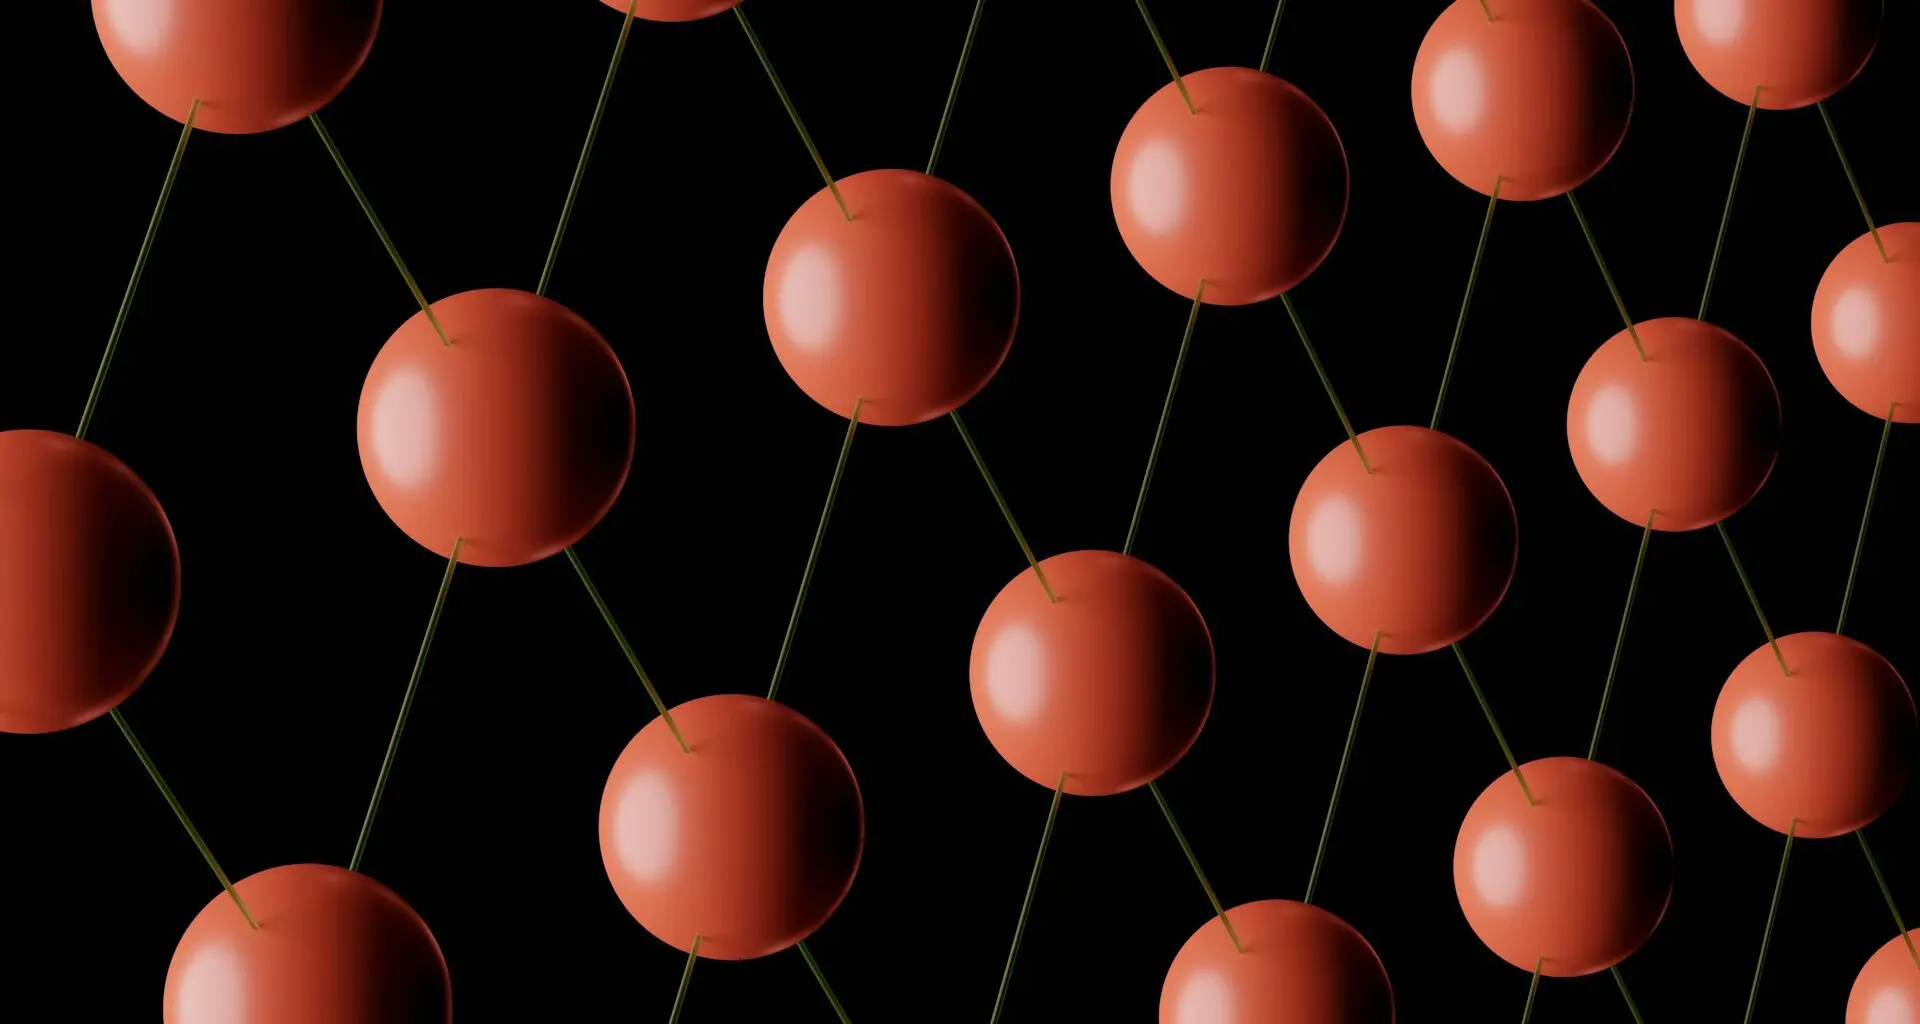 Red spheres connected by thin green lines, forming a grid pattern on a black background, representing a blockchain network.